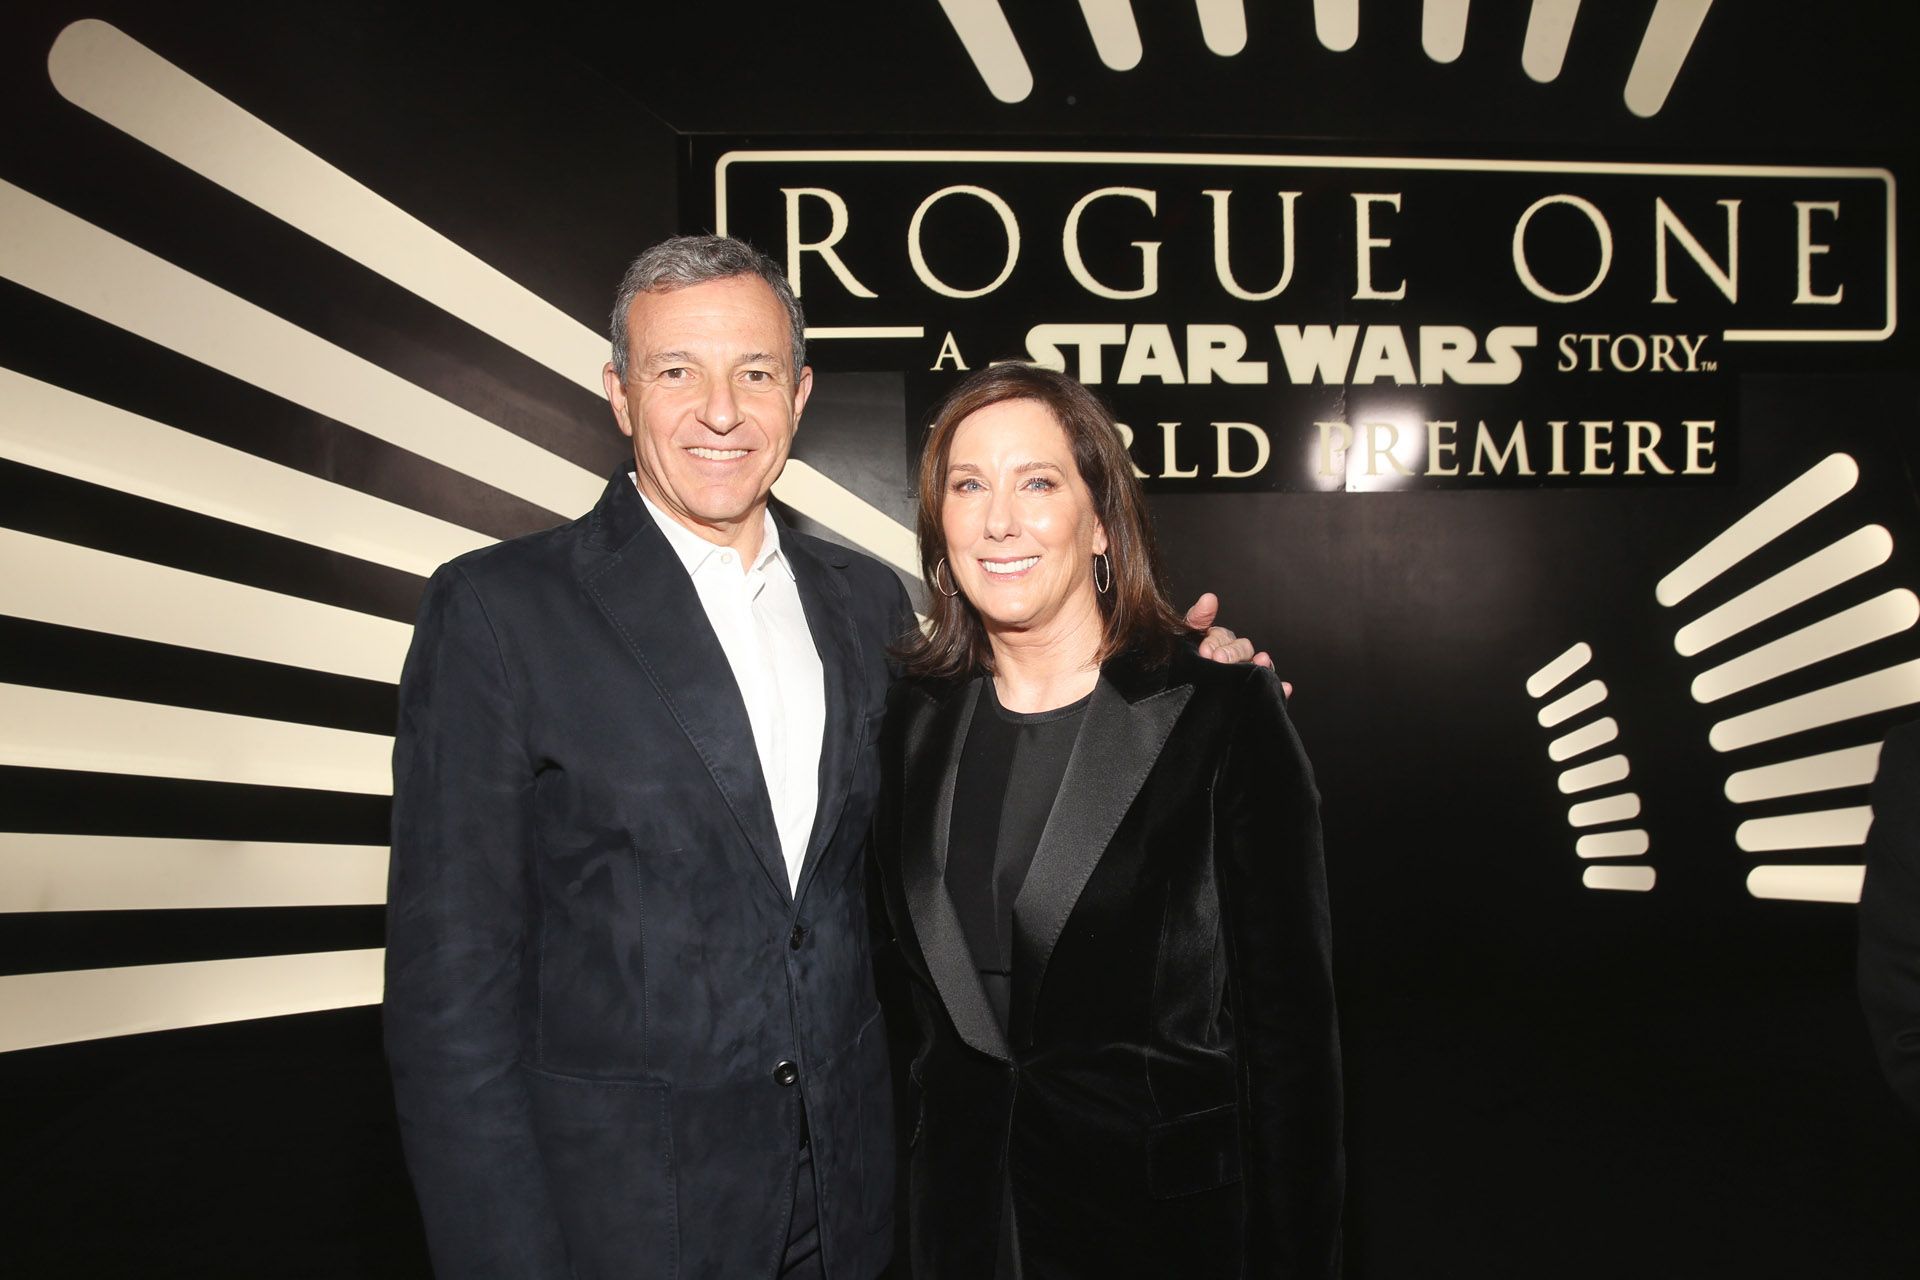 Bob Iger and Kathleen Kennedy at Star Wars Rogue One Premiere